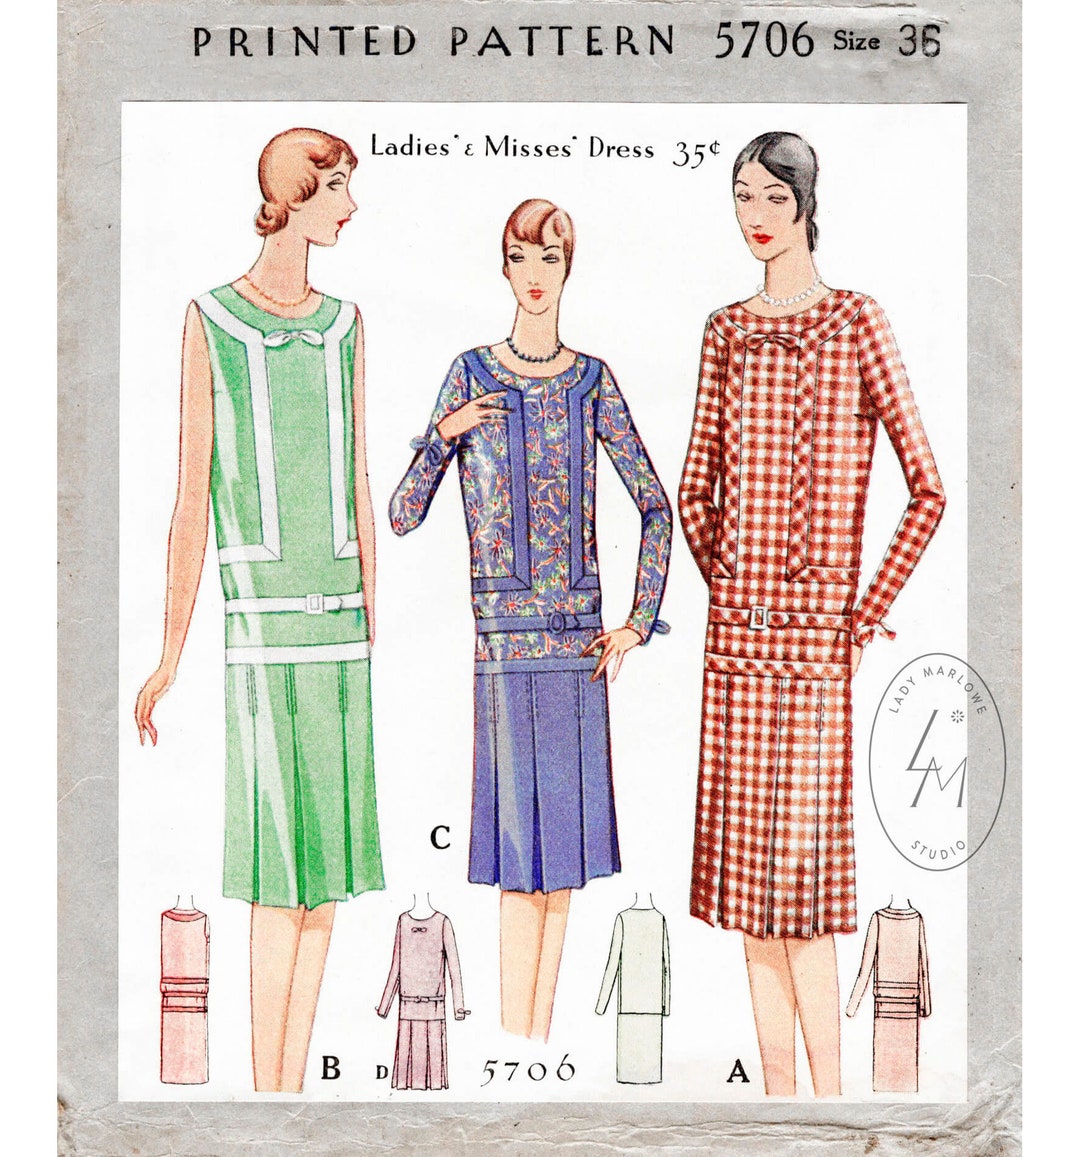 1920s Dress / Vintage Sewing Pattern Reproduction / Art Deco - Etsy